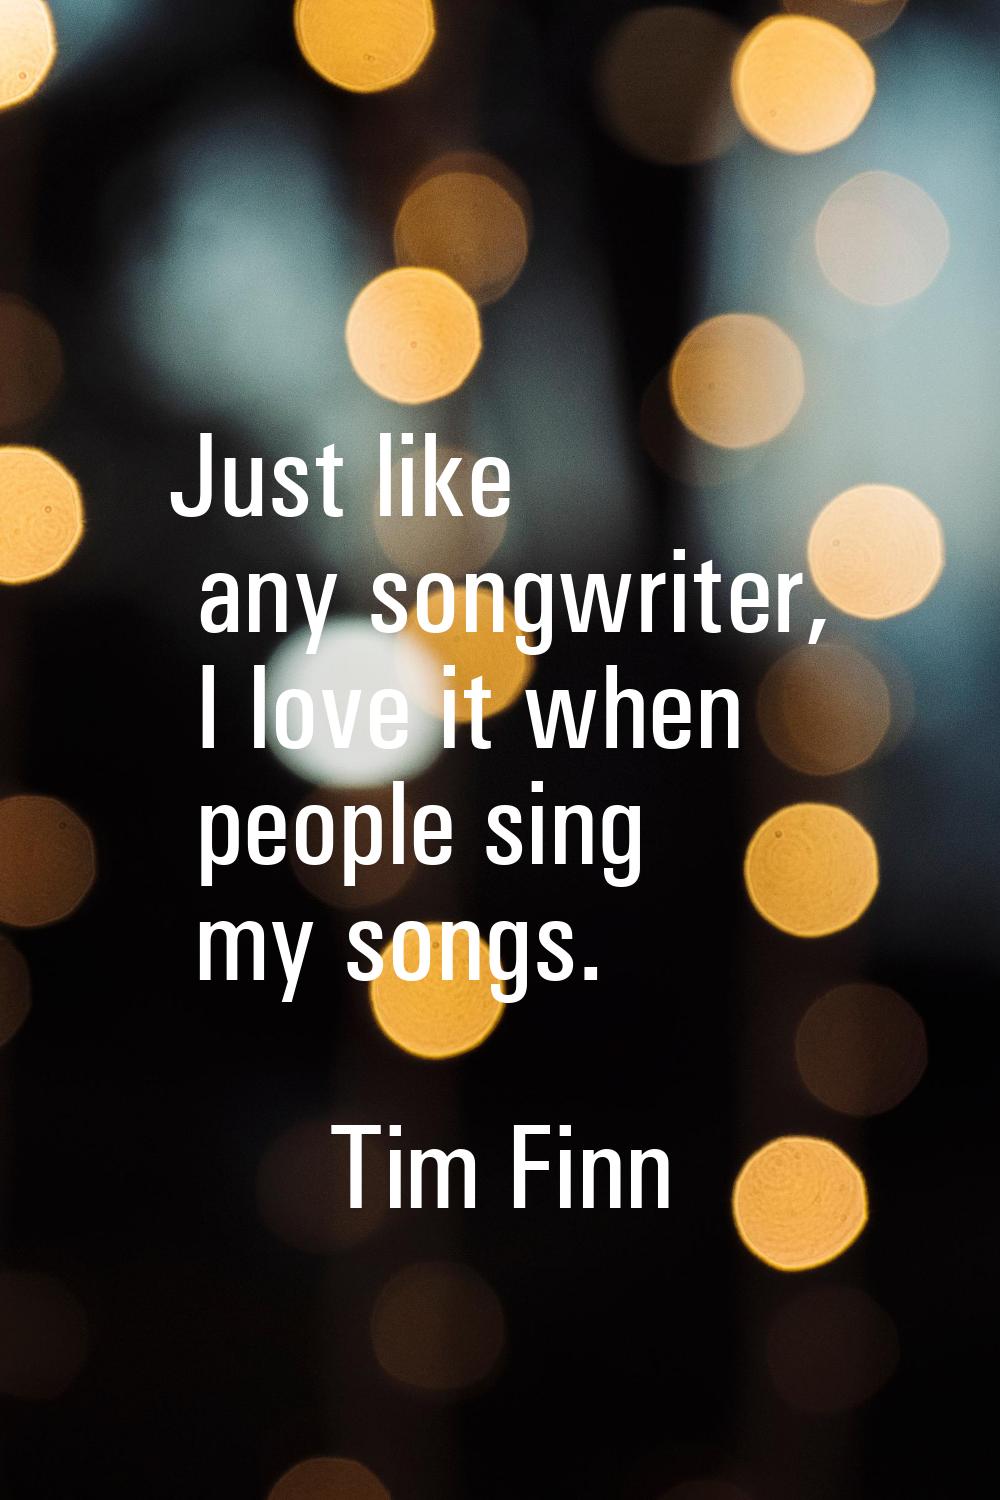 Just like any songwriter, I love it when people sing my songs.